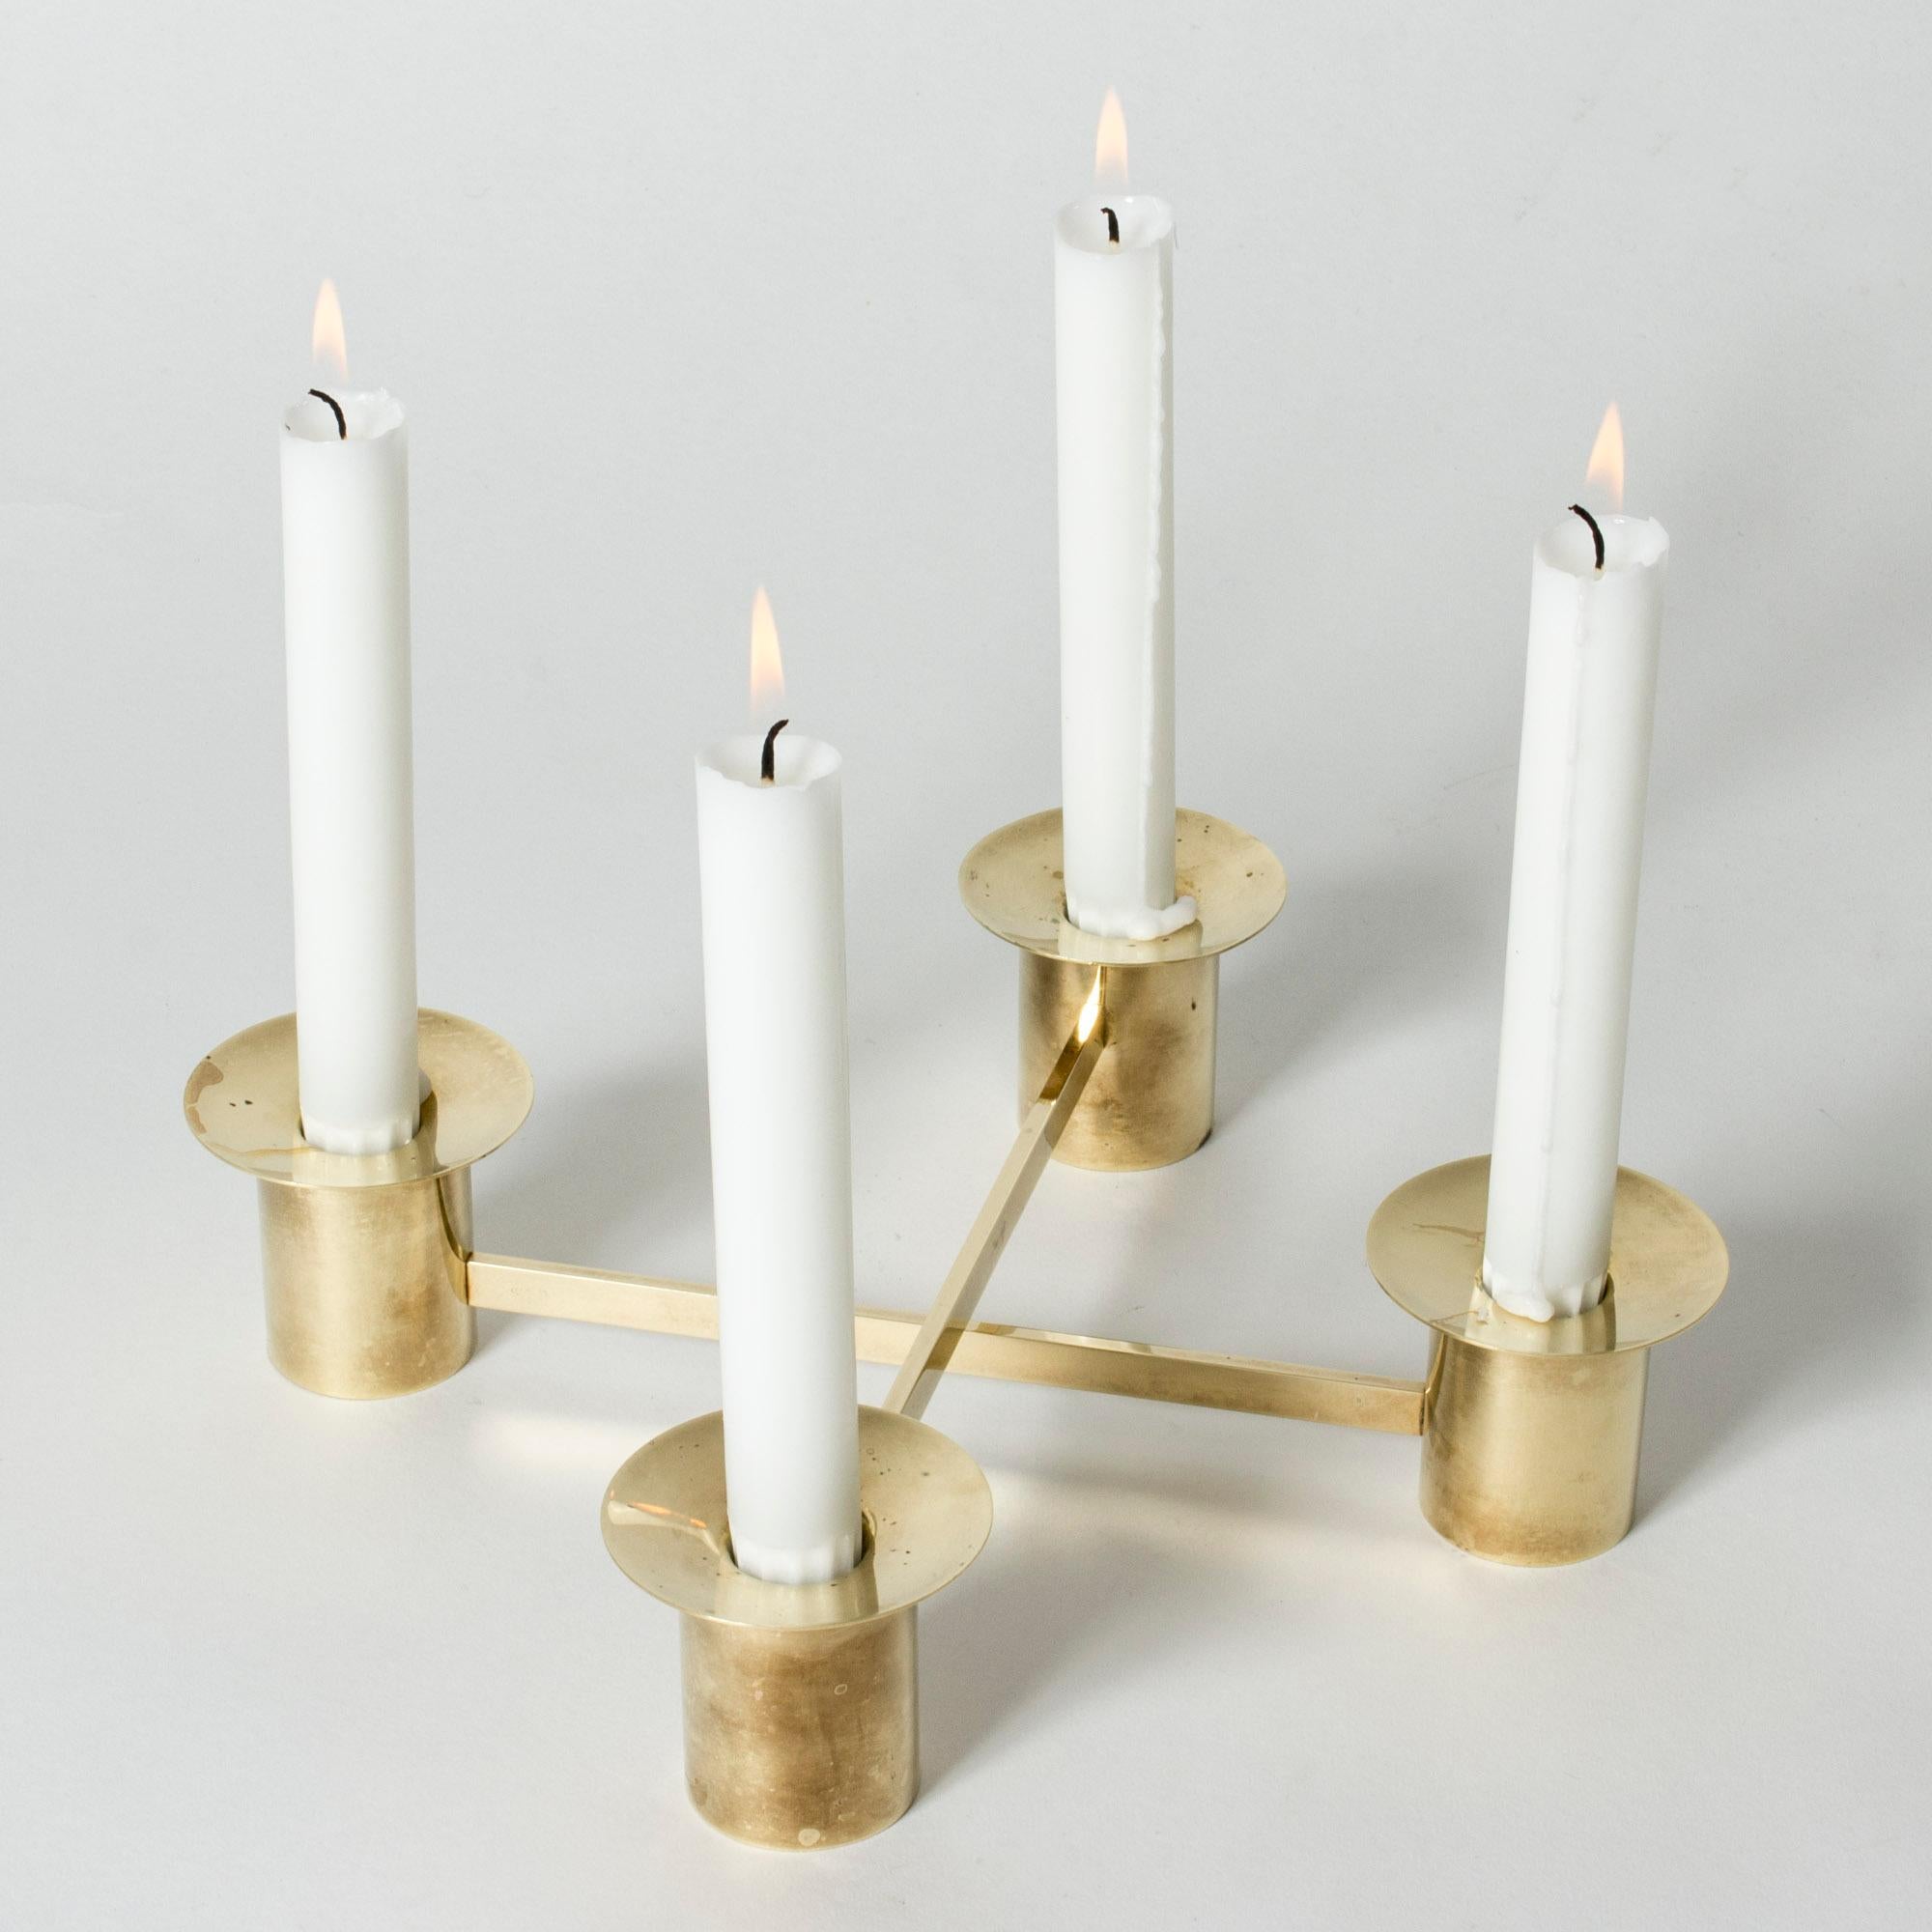 Elegant brass candlestick by Sigurd Persson, made in two sections that can be set in a variation of ways. Can also be combined with additional sections.